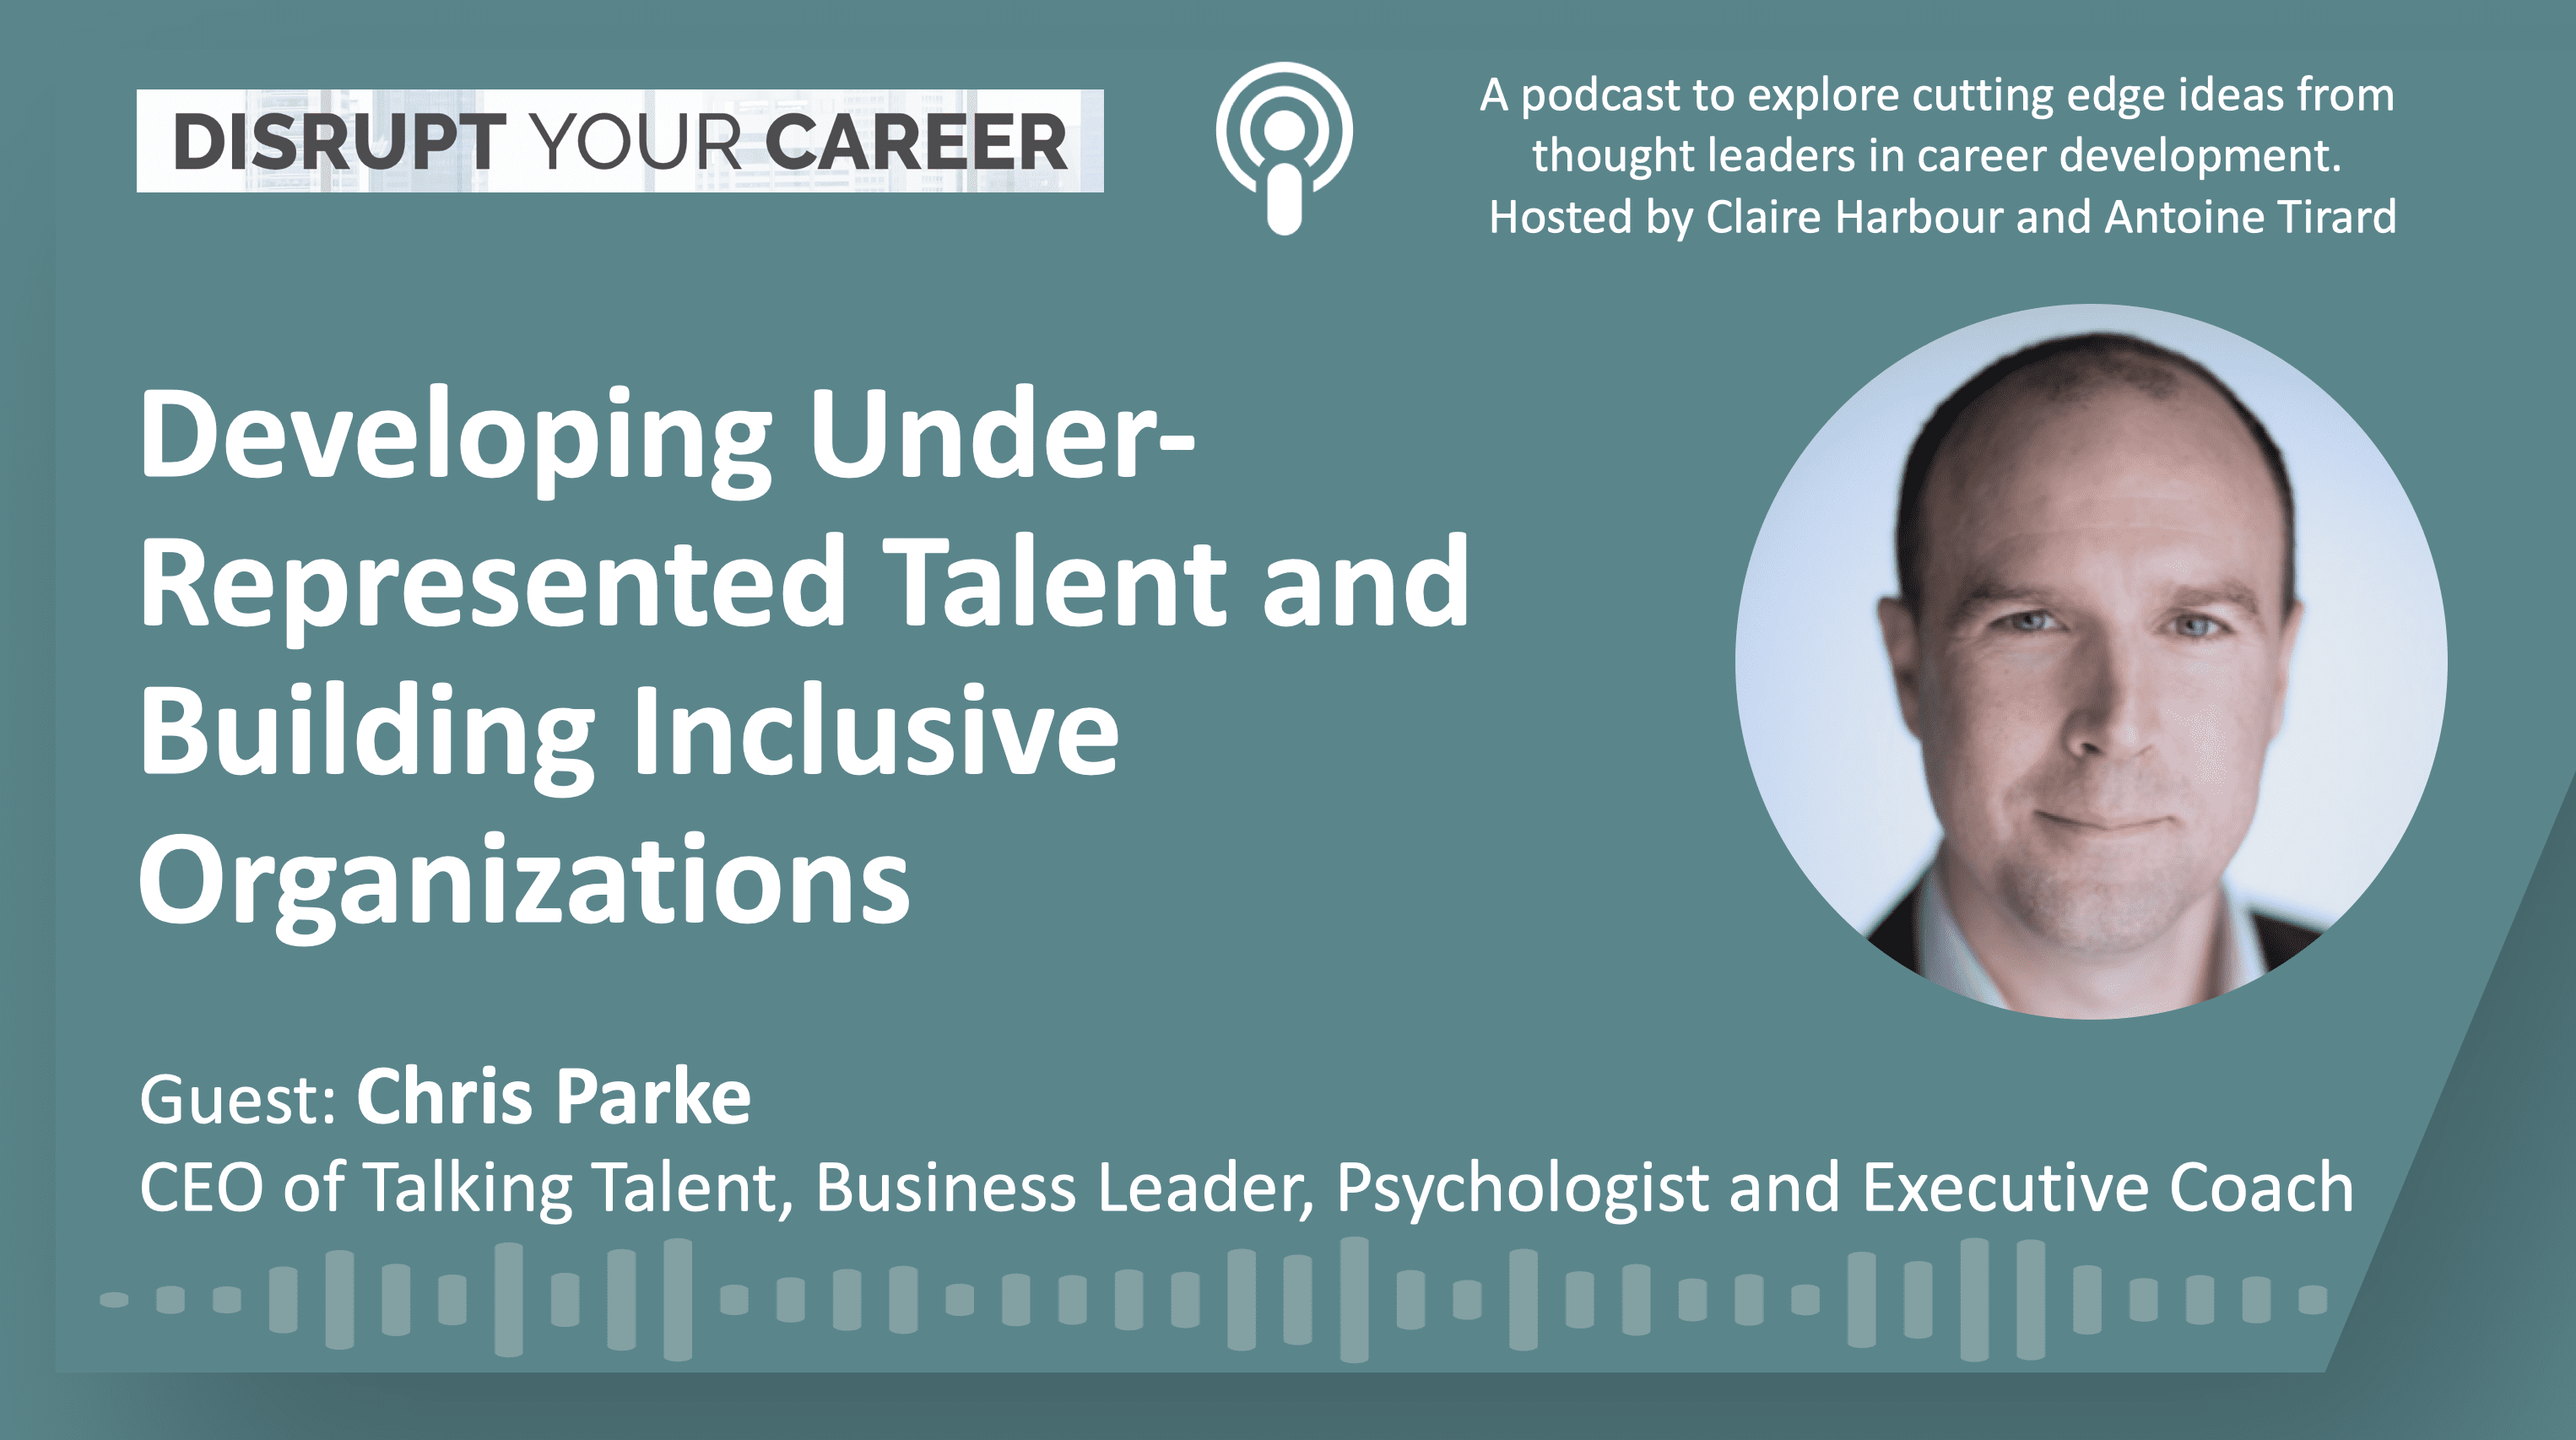 Developing Under-Represented Talent and Building Inclusive Organizations